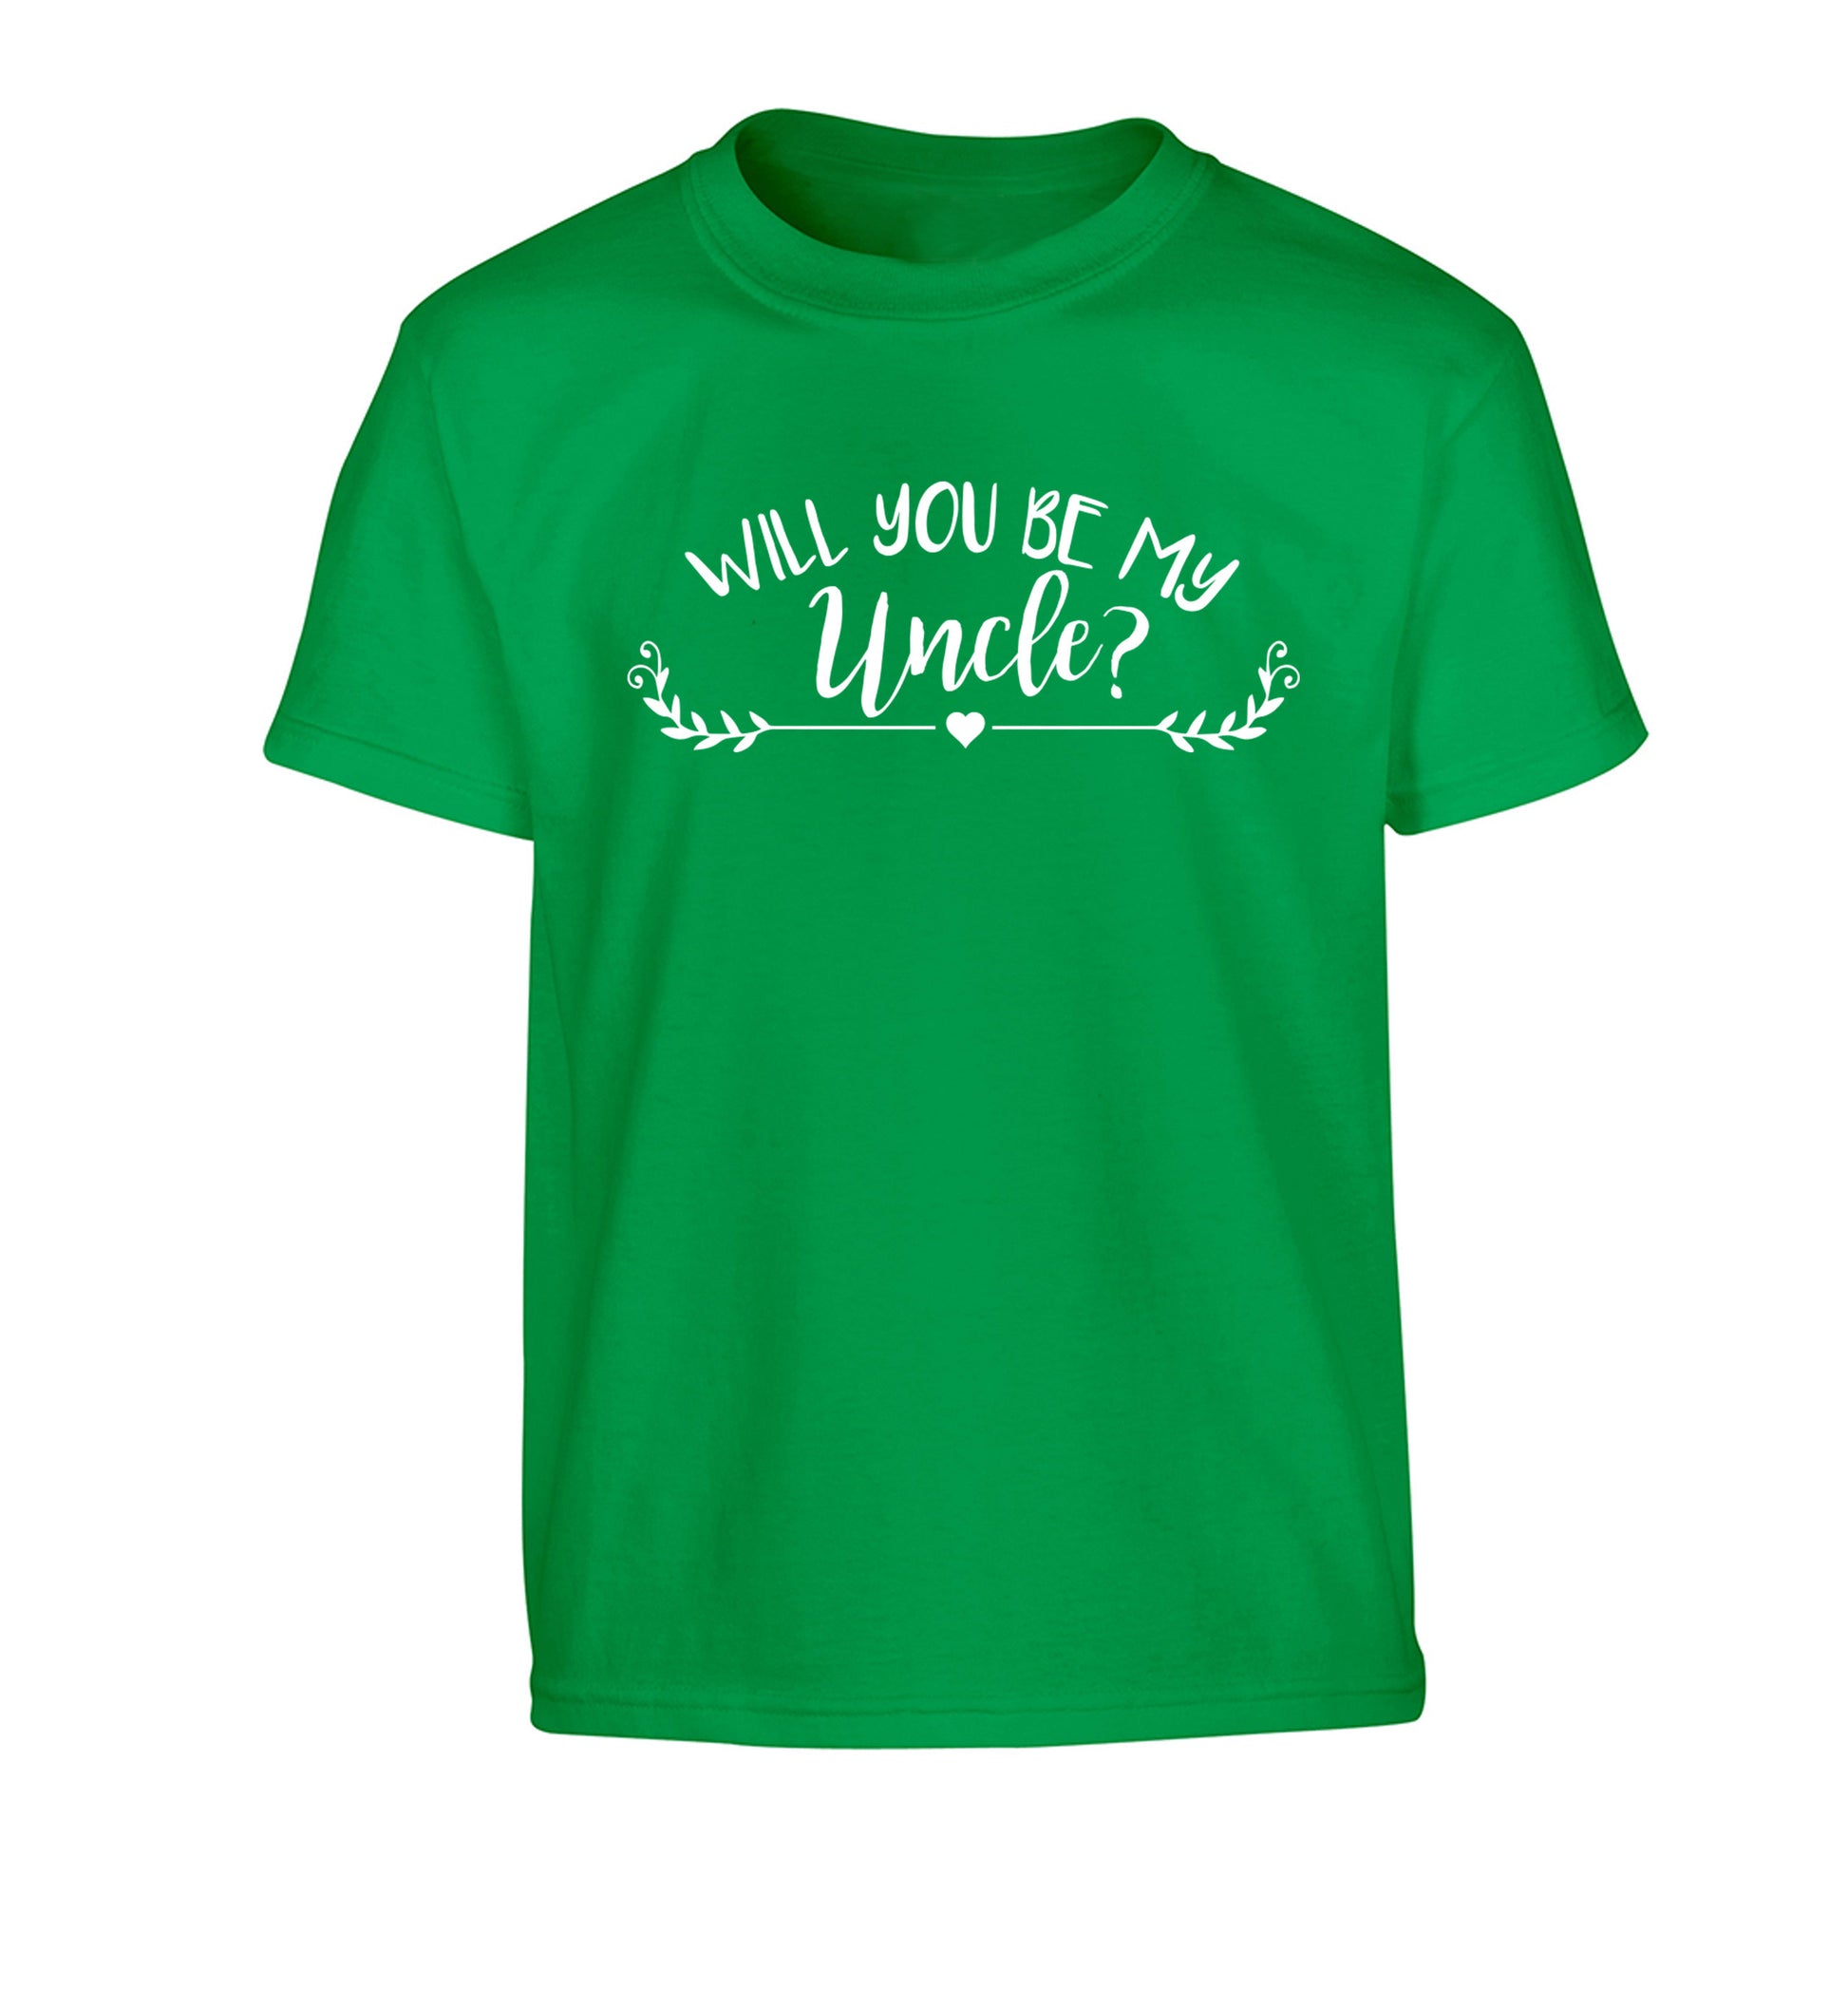 Will you be my uncle? Children's green Tshirt 12-14 Years